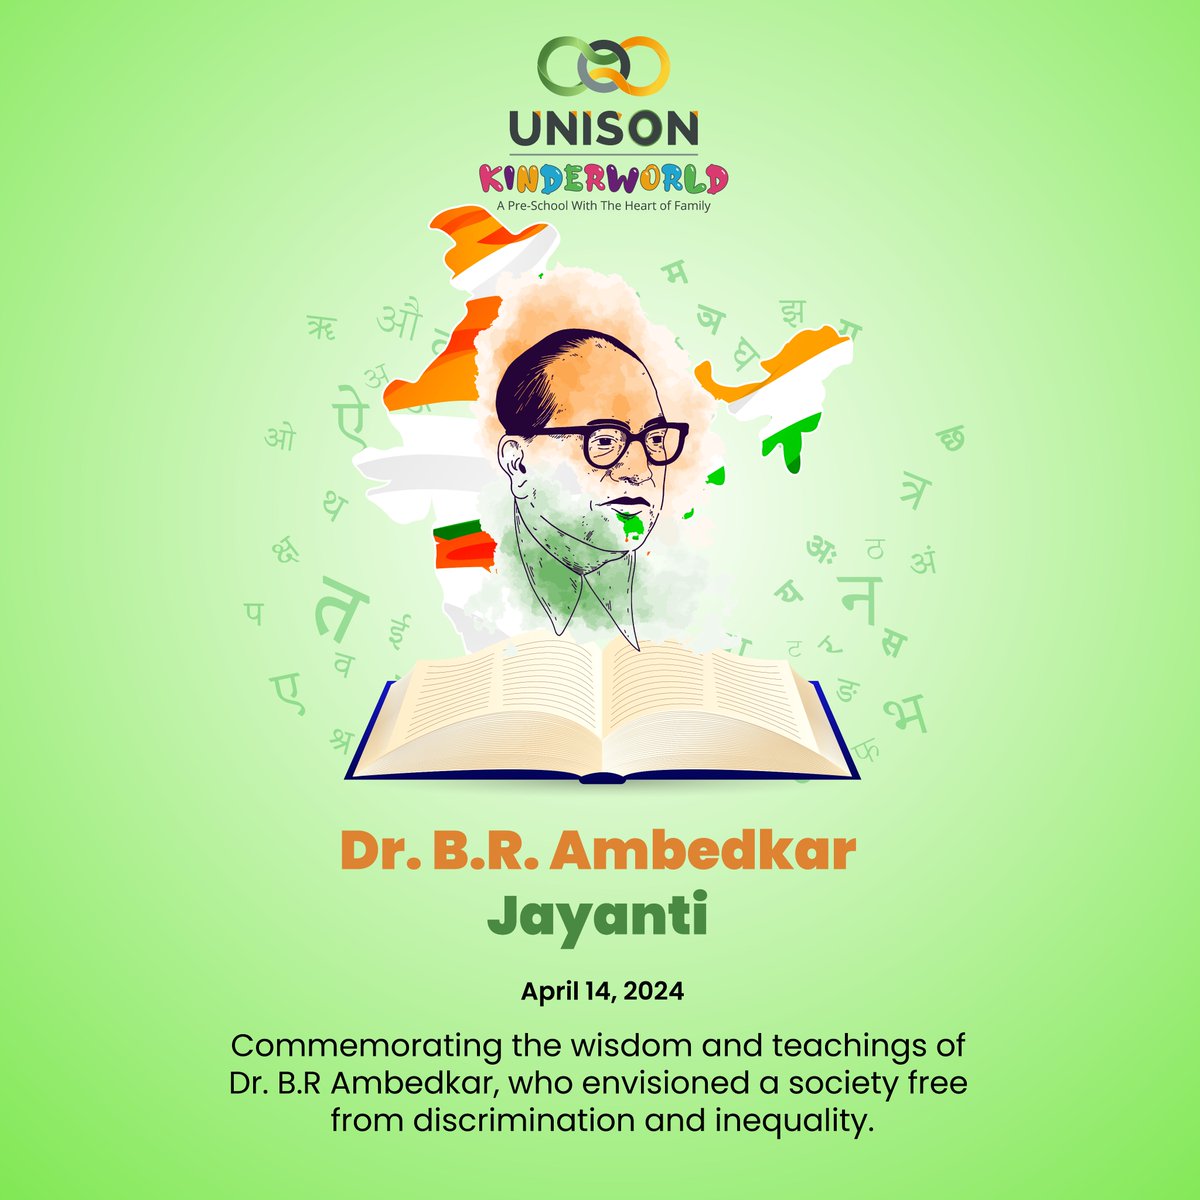 Celebrating the birth anniversary of Dr B.R. Ambedkar, an icon of social justice and equality. Let's continue to uphold his legacy and strive for a harmonious society🌟

#AmbedkarJayanti #SocialJustice #UnisonKinderWorld #CBSESchool #HolisticDevelopment #LearningIsFun